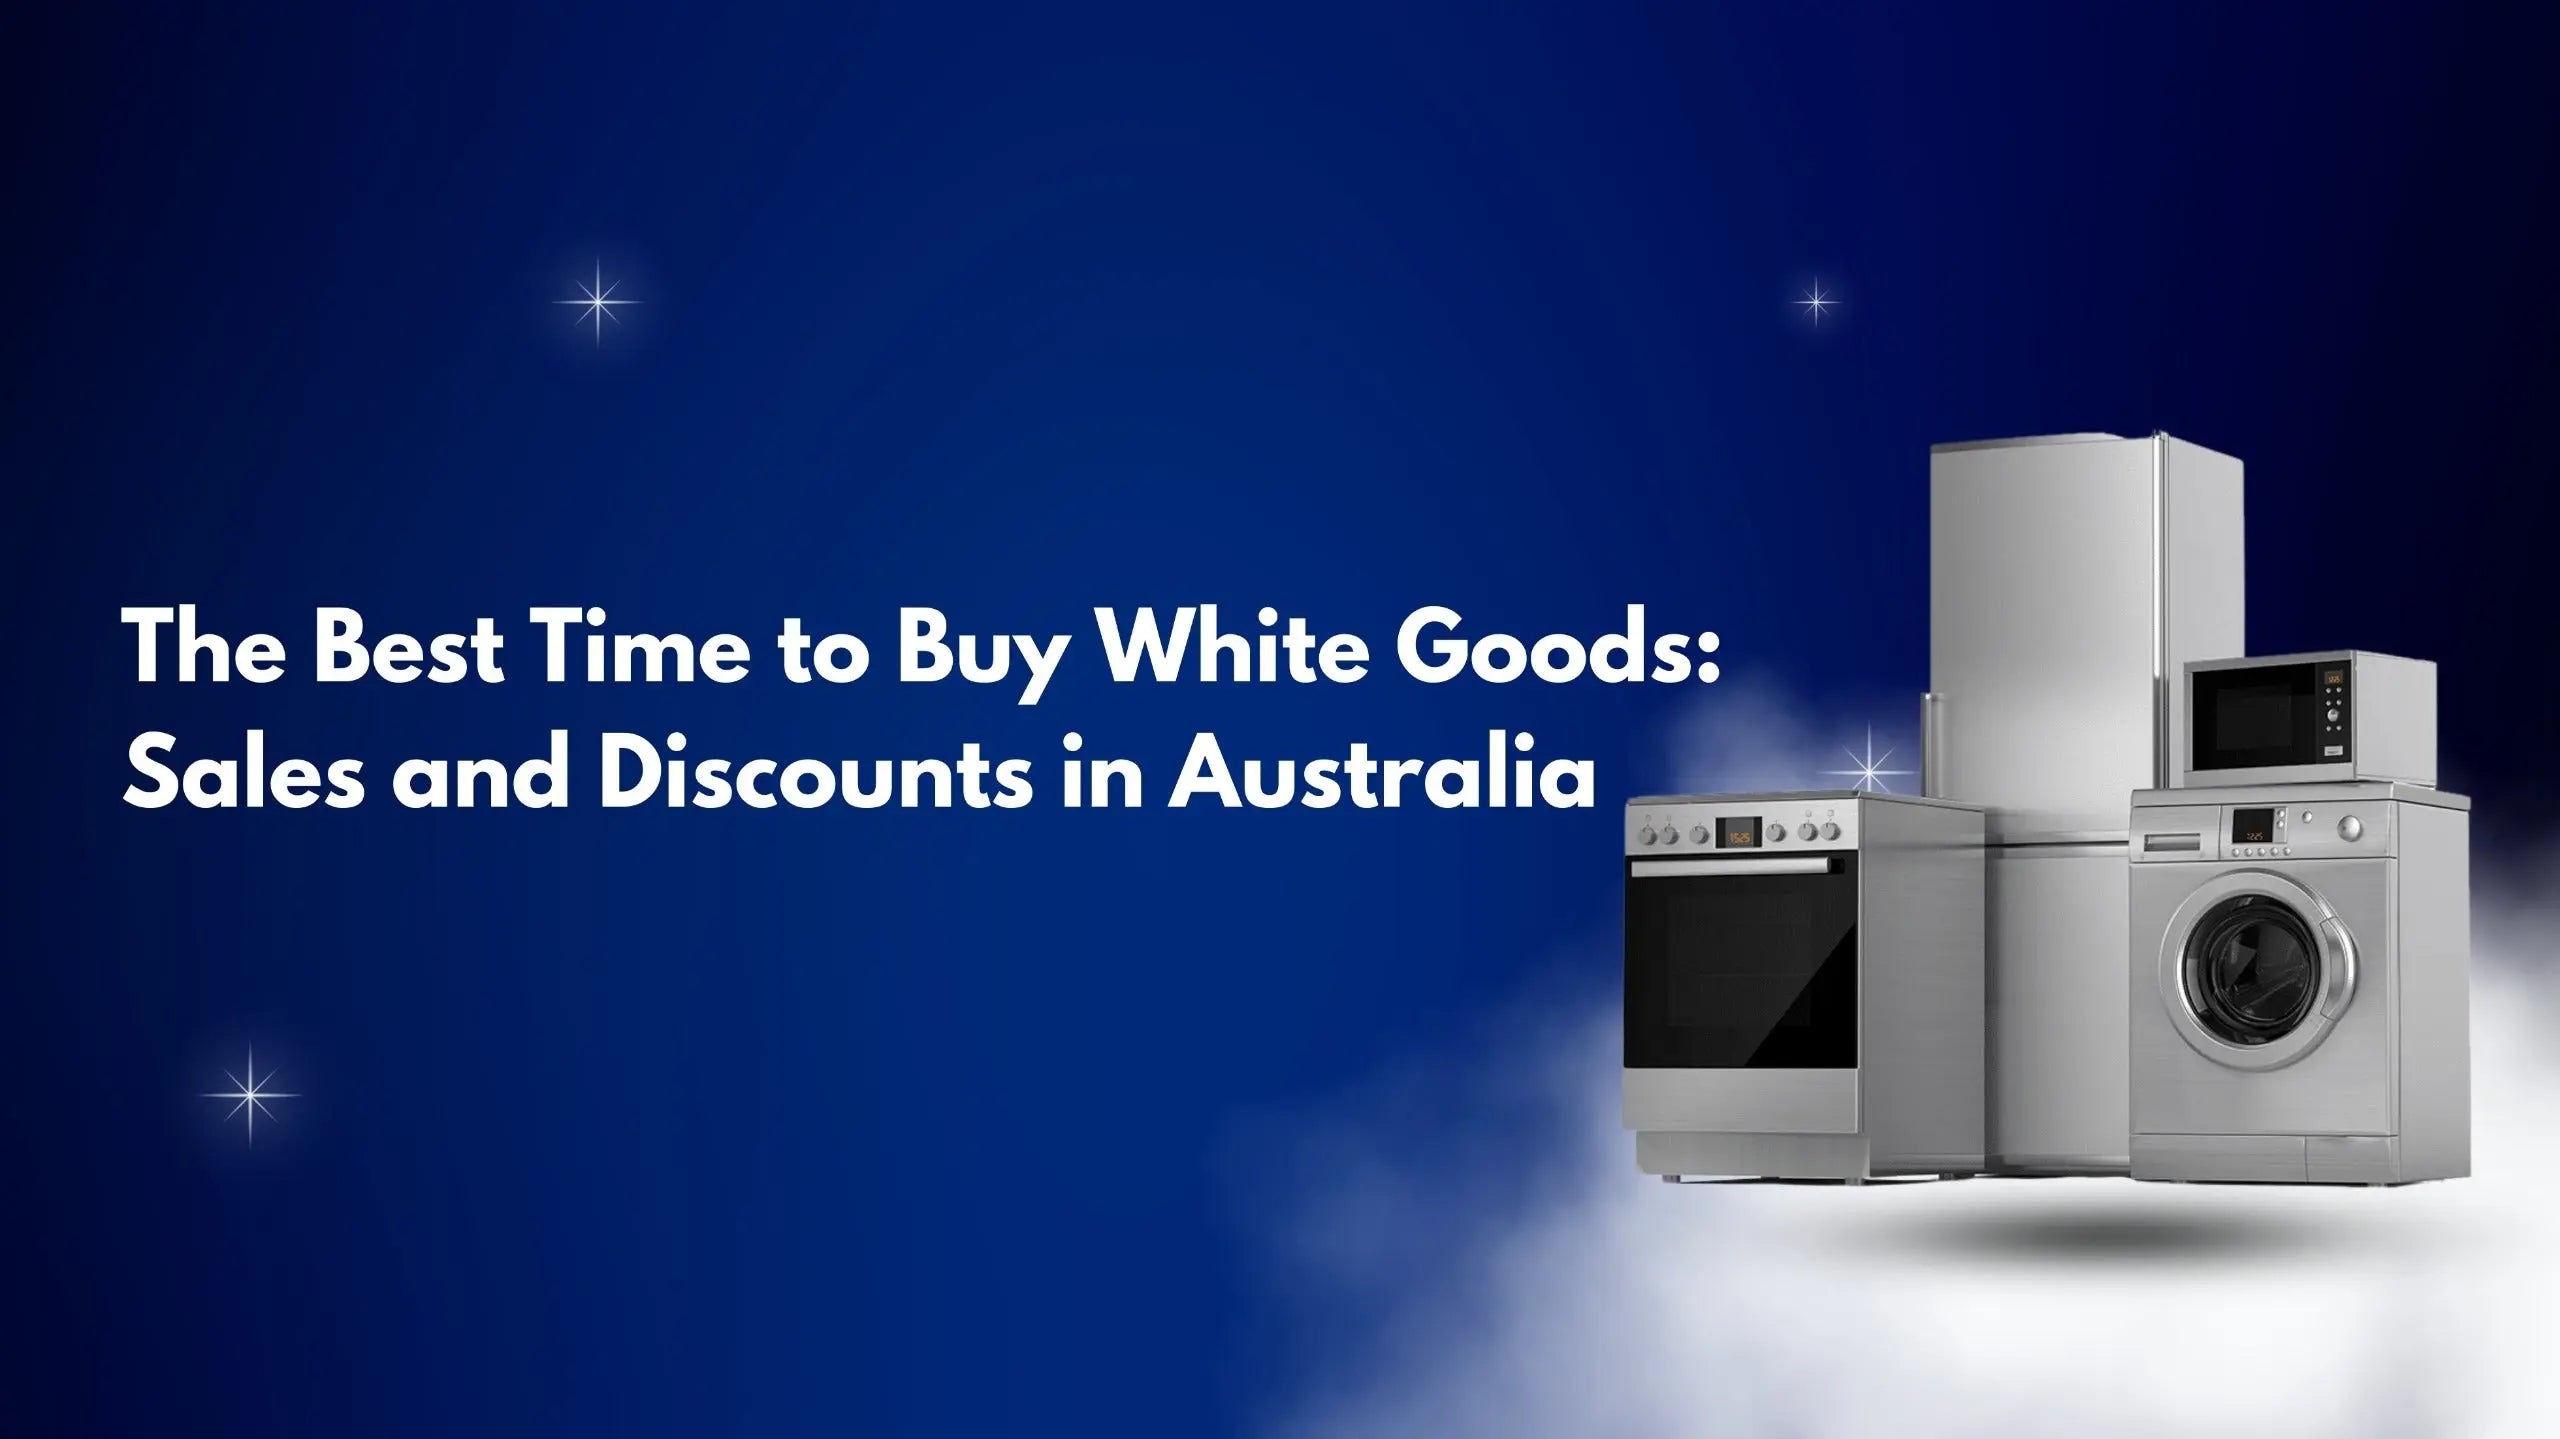 The Best Time to Buy White Goods: Sales and Discounts in Australia